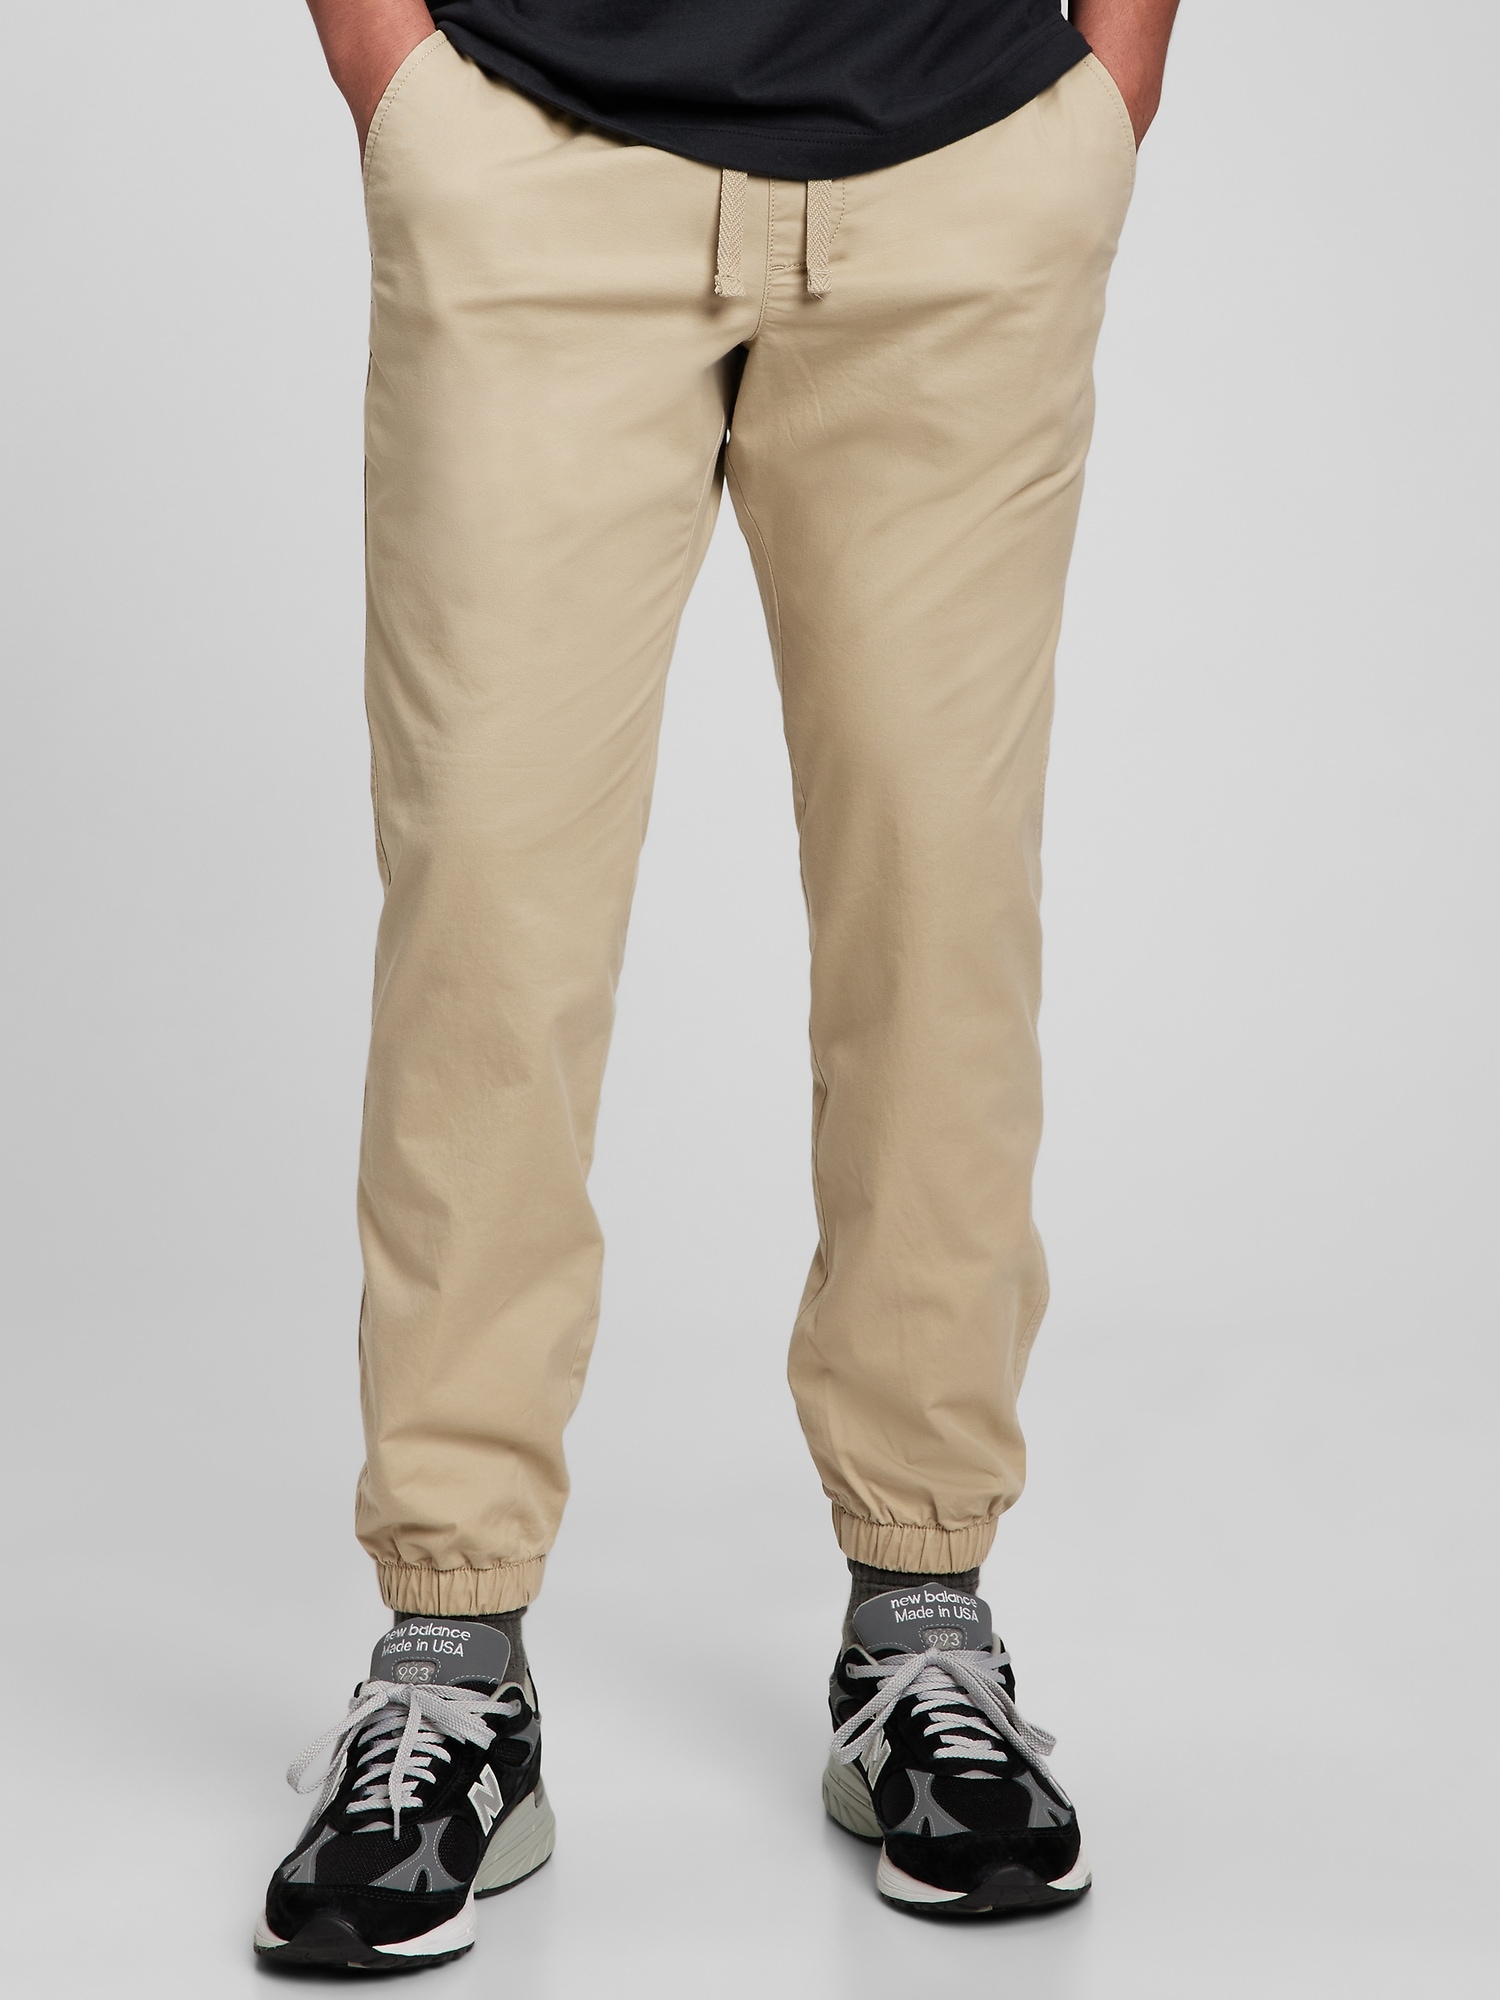 Stretch Canvas Carpenter's Pants for Tall Men